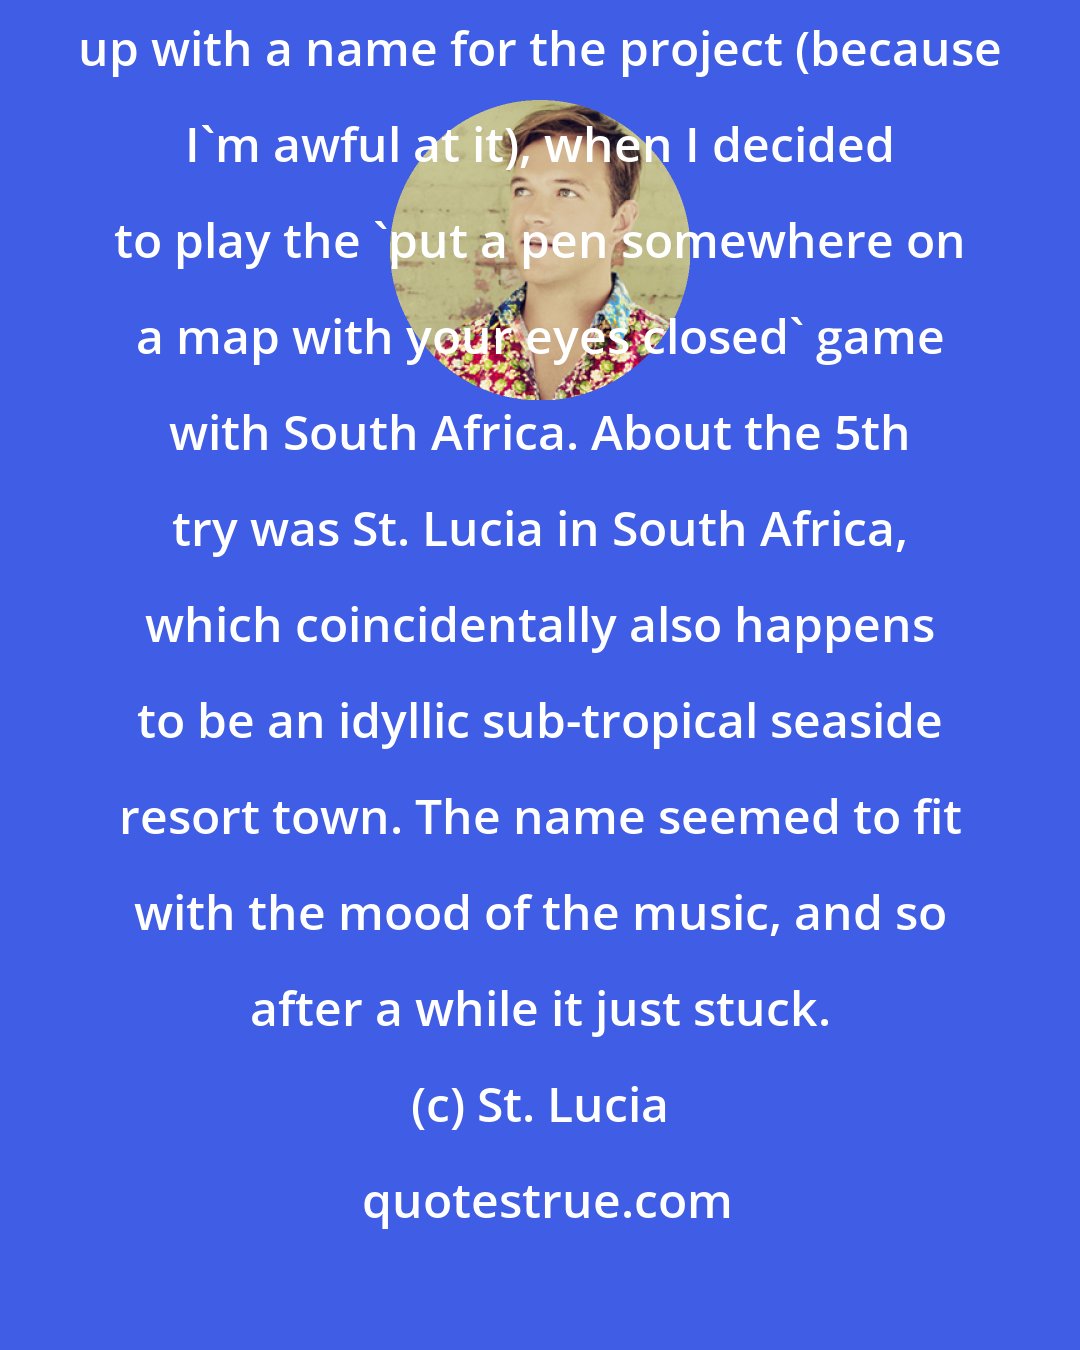 St. Lucia: I was extremely frustrated, almost at the point of giving up on coming up with a name for the project (because I'm awful at it), when I decided to play the 'put a pen somewhere on a map with your eyes closed' game with South Africa. About the 5th try was St. Lucia in South Africa, which coincidentally also happens to be an idyllic sub-tropical seaside resort town. The name seemed to fit with the mood of the music, and so after a while it just stuck.